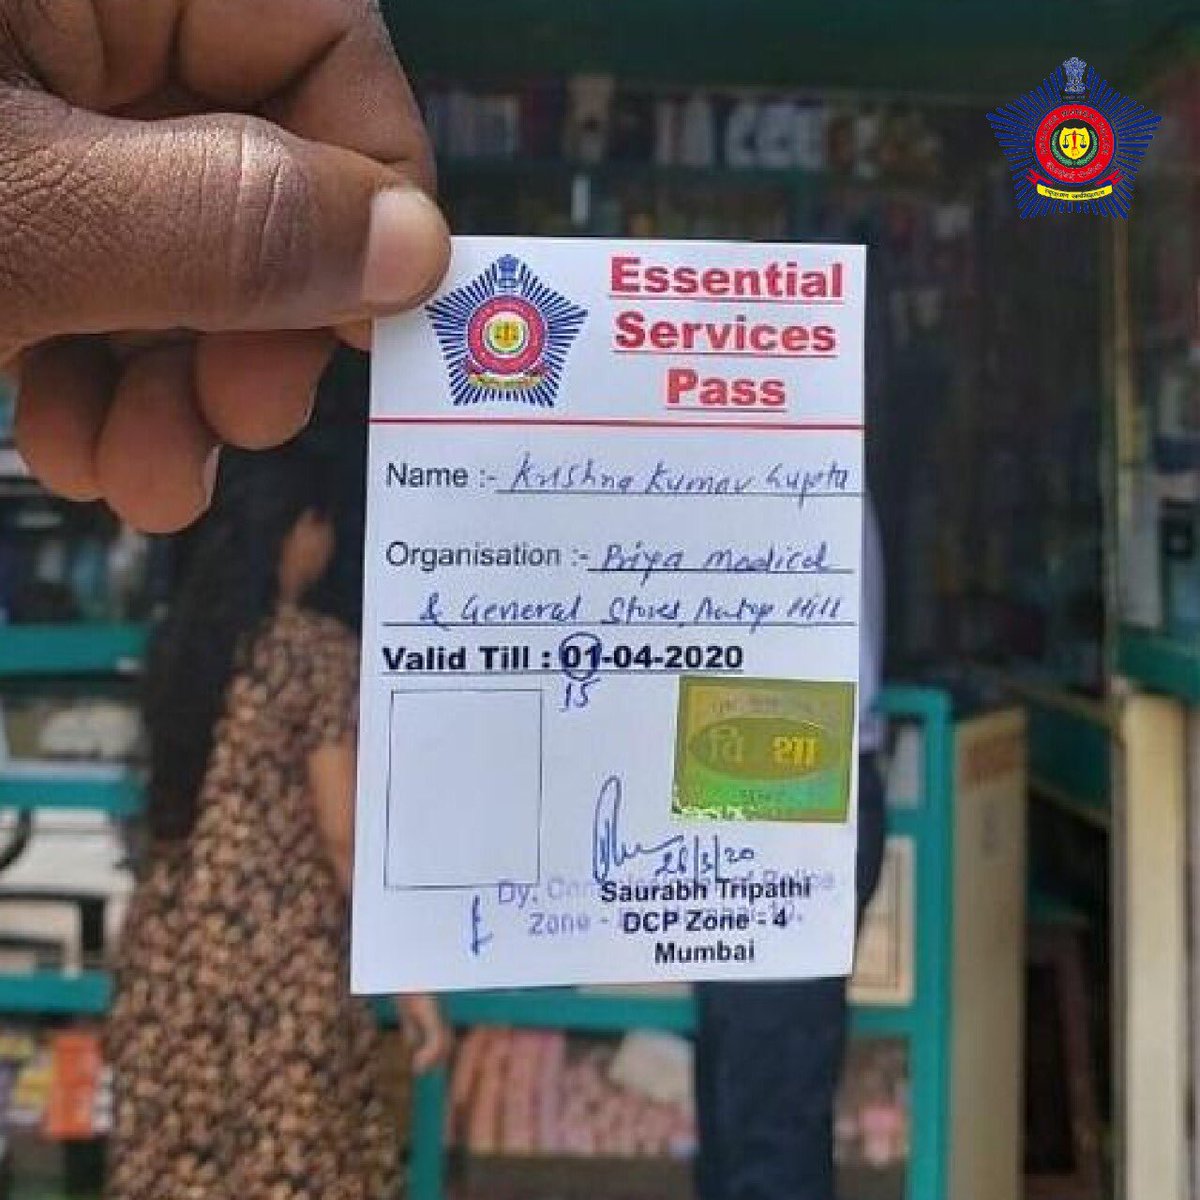 Essential pass, for essential services. Requesting all shops providing essential services & commodities, to reach out to their local police station for these passes, to ensure hassle-free commute & sale #wEcommerceMumbai #essentialservices #essentialgoods #coronavirus